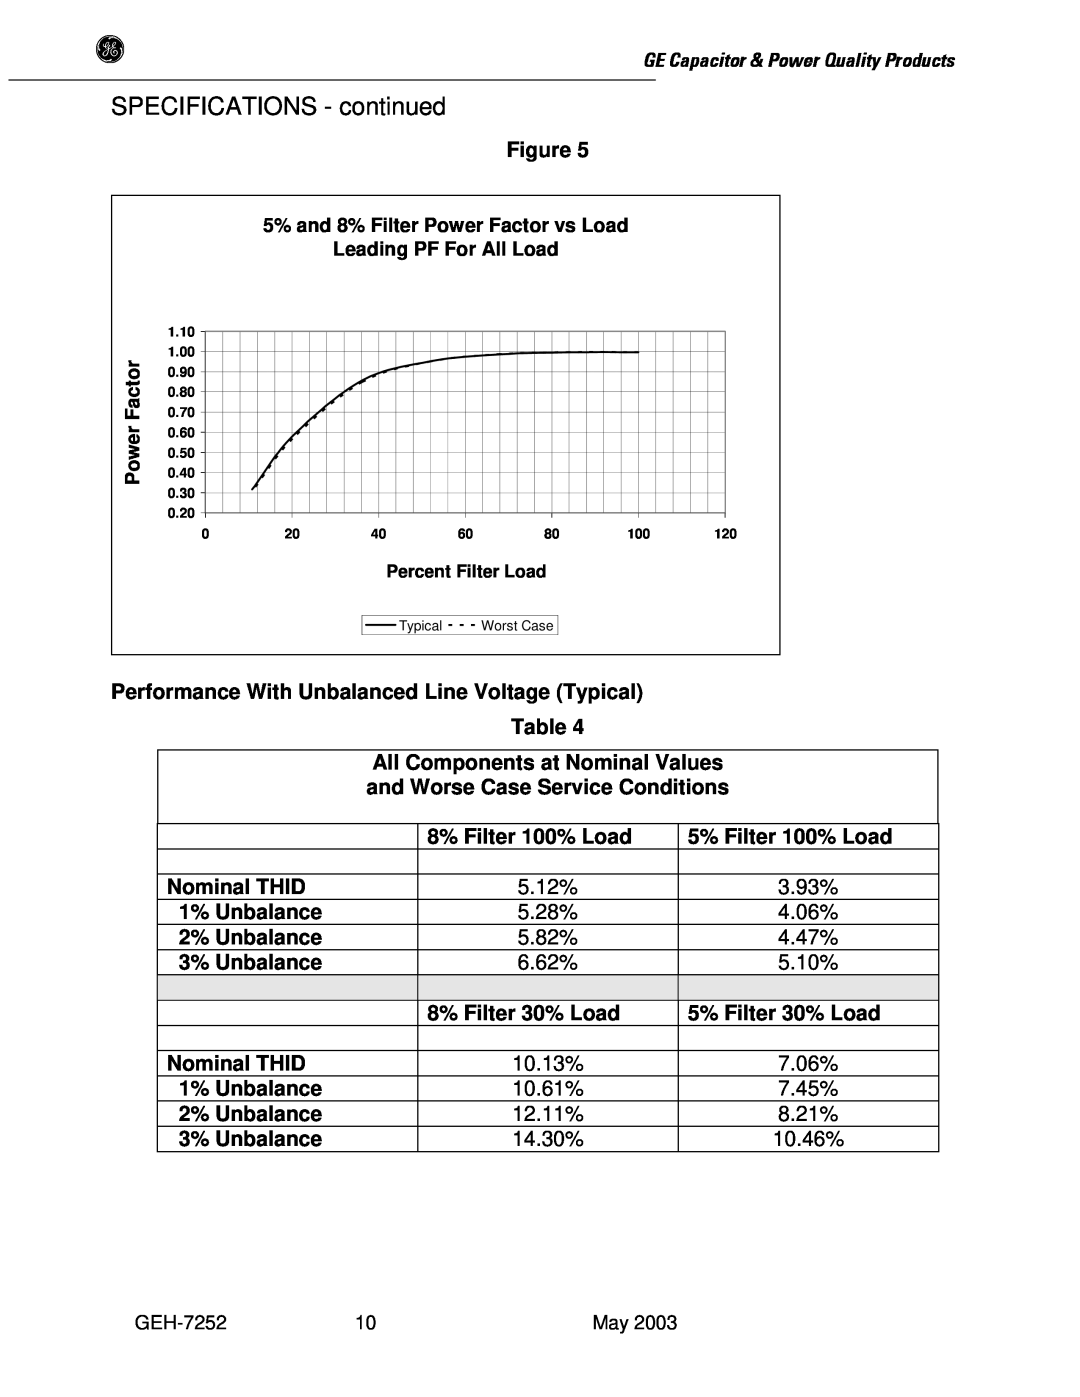 GE SERIES B 480 Performance With Unbalanced Line Voltage Typical, Table All Components at Nominal Values, Nominal THID 